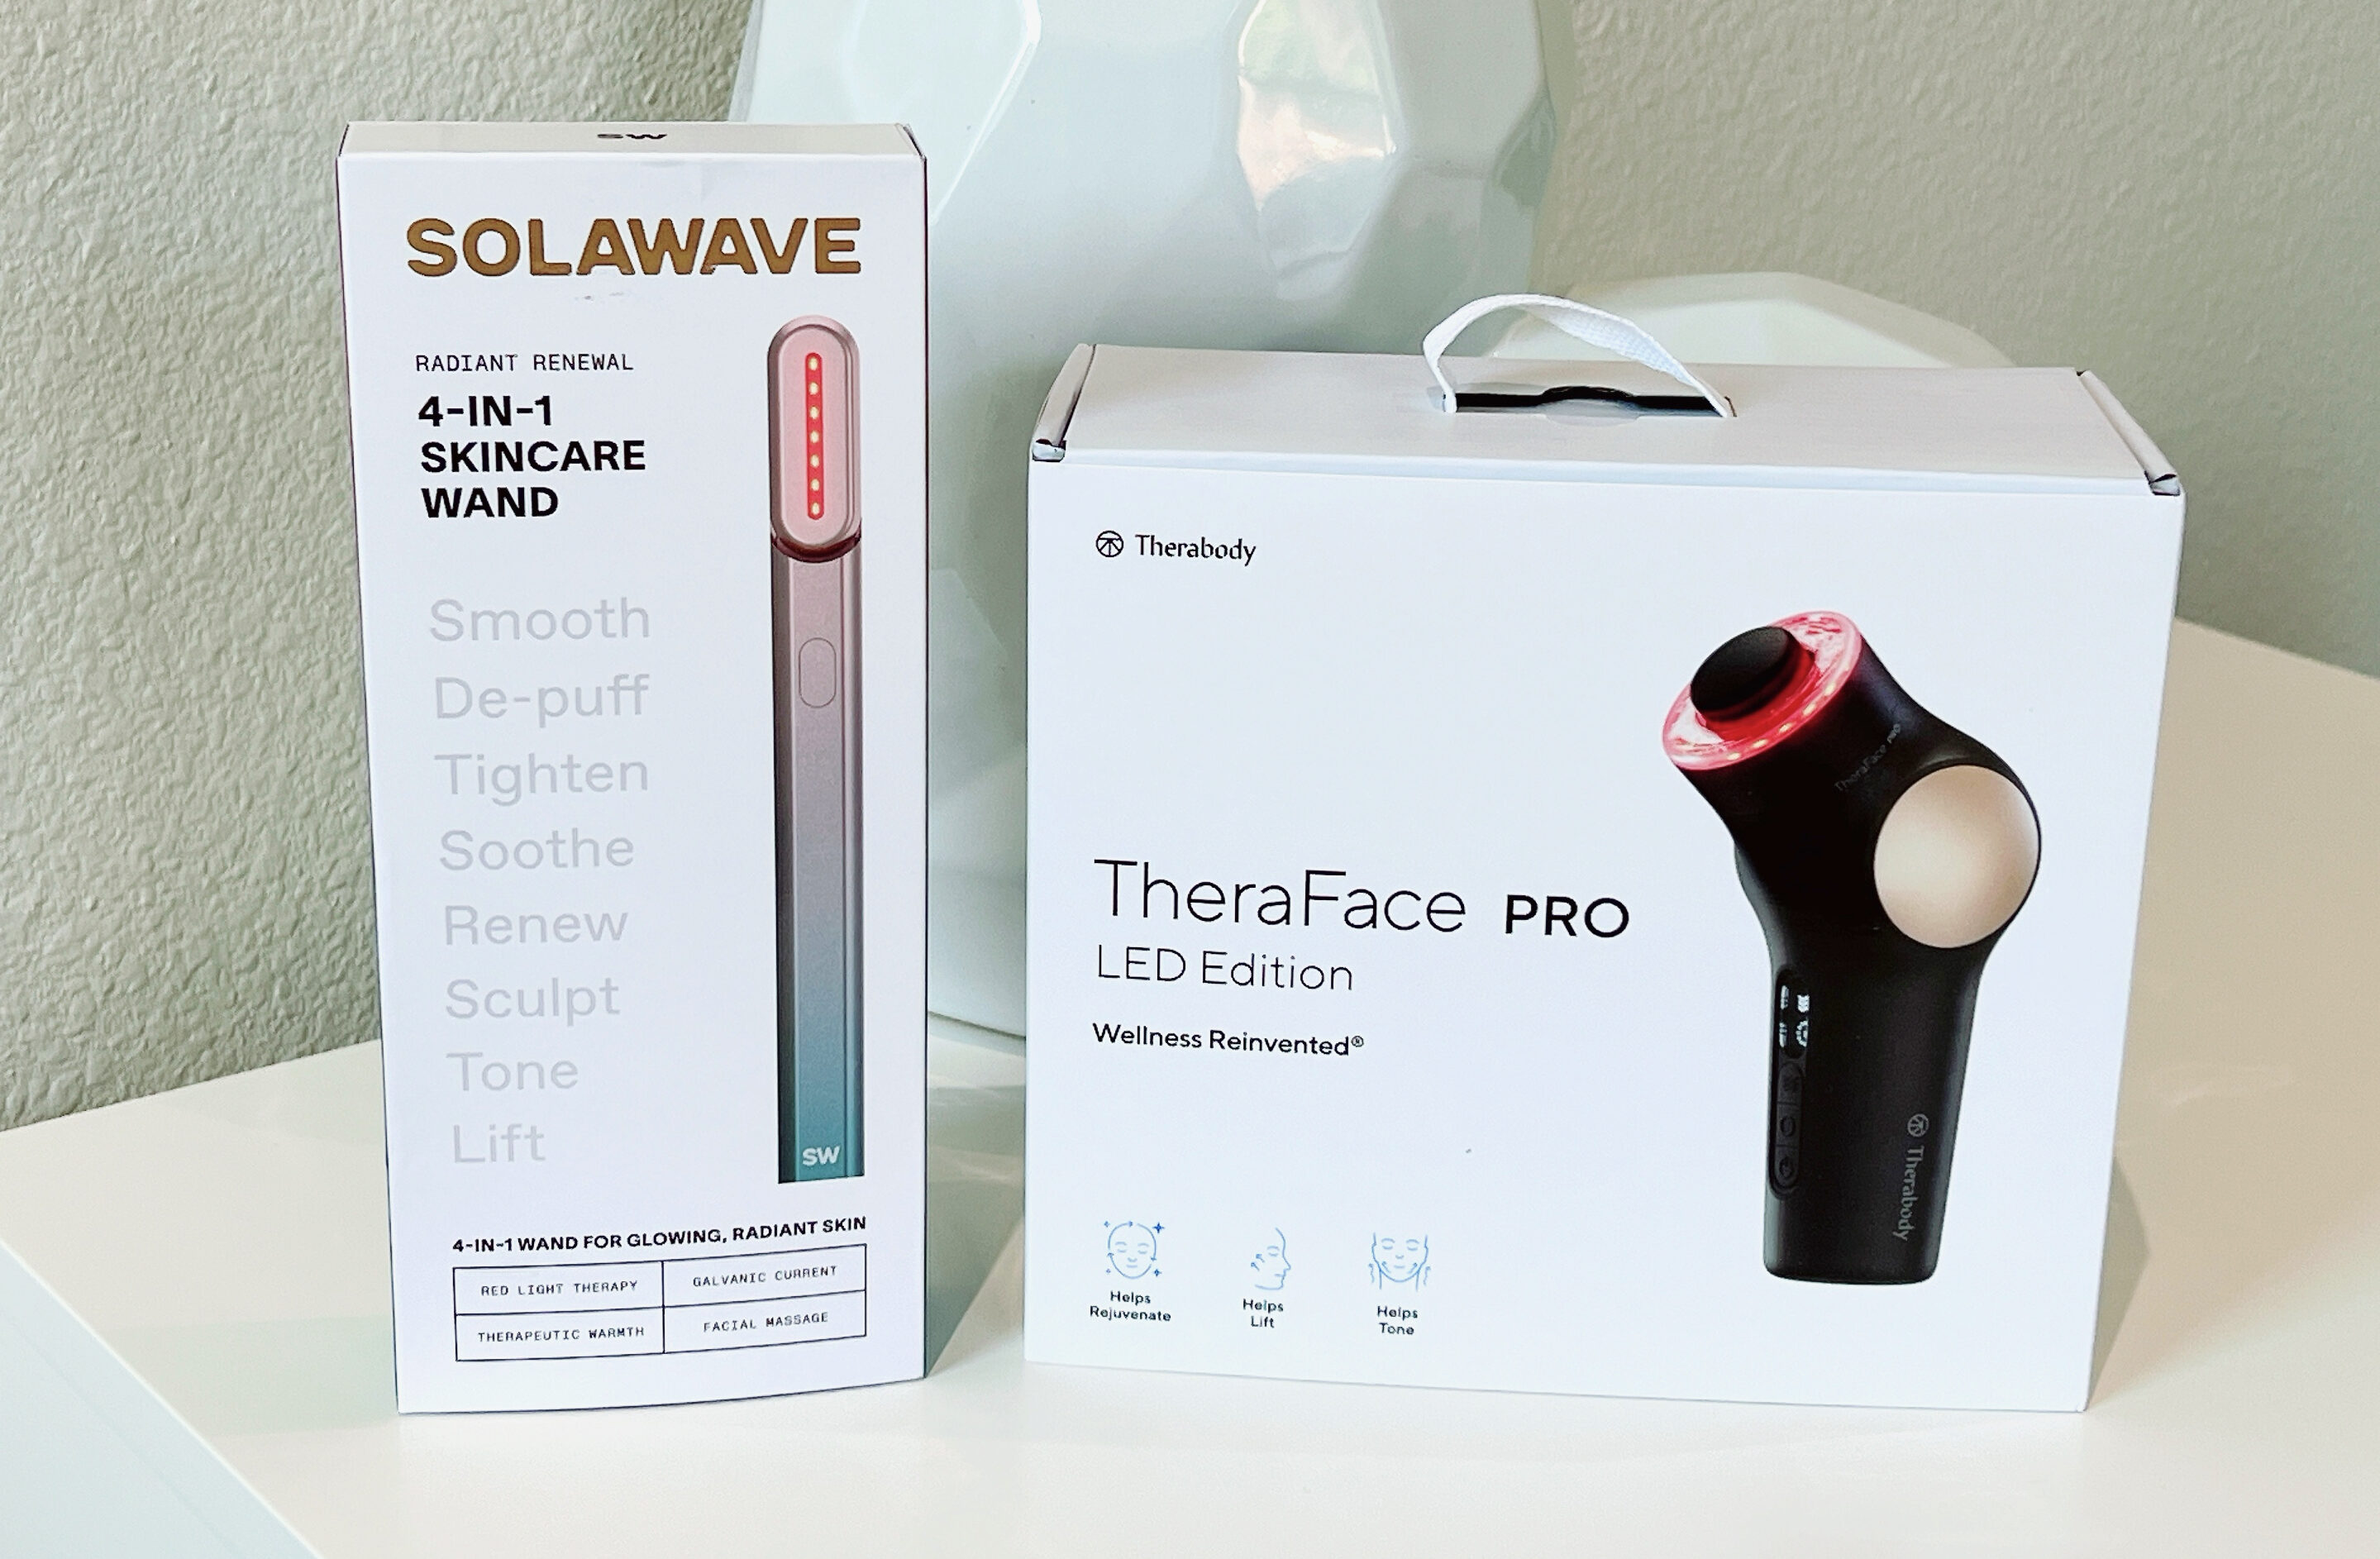 TheraFace Pro LED vs. Solawave: Which Skincare Tool is Transforming My Skin?